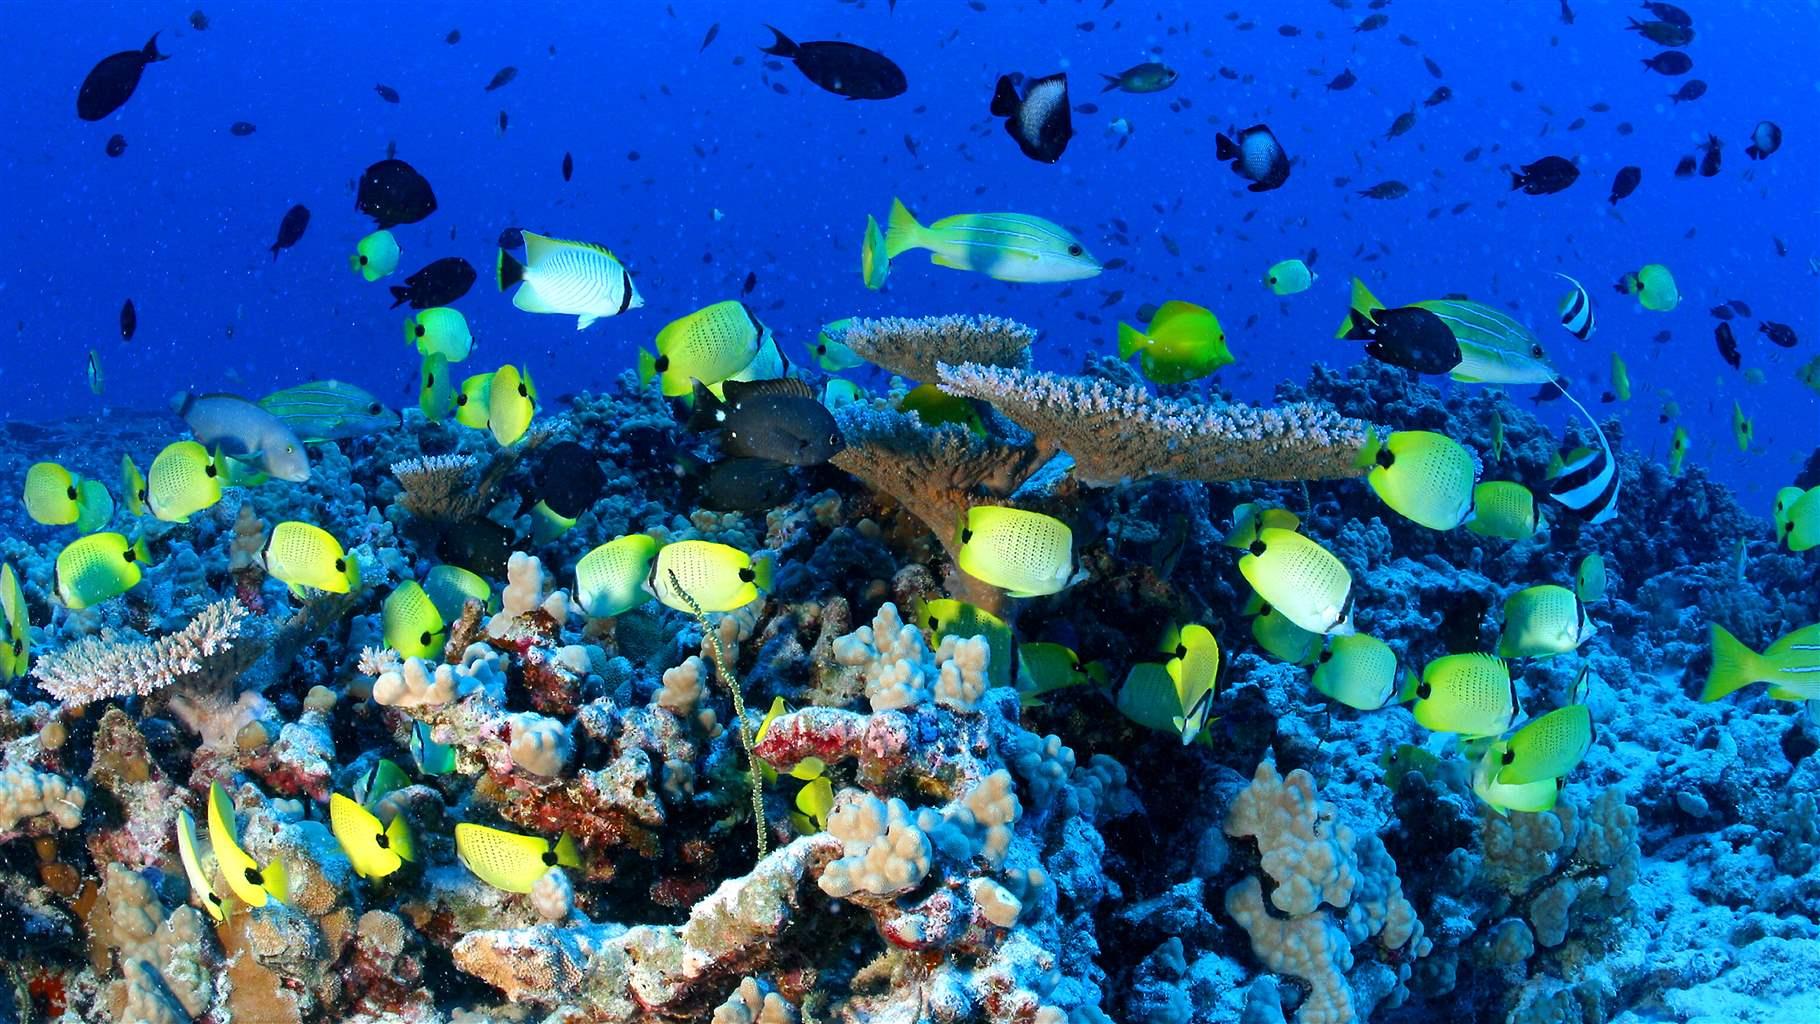 How Does Overfishing Affect Coral Reefs